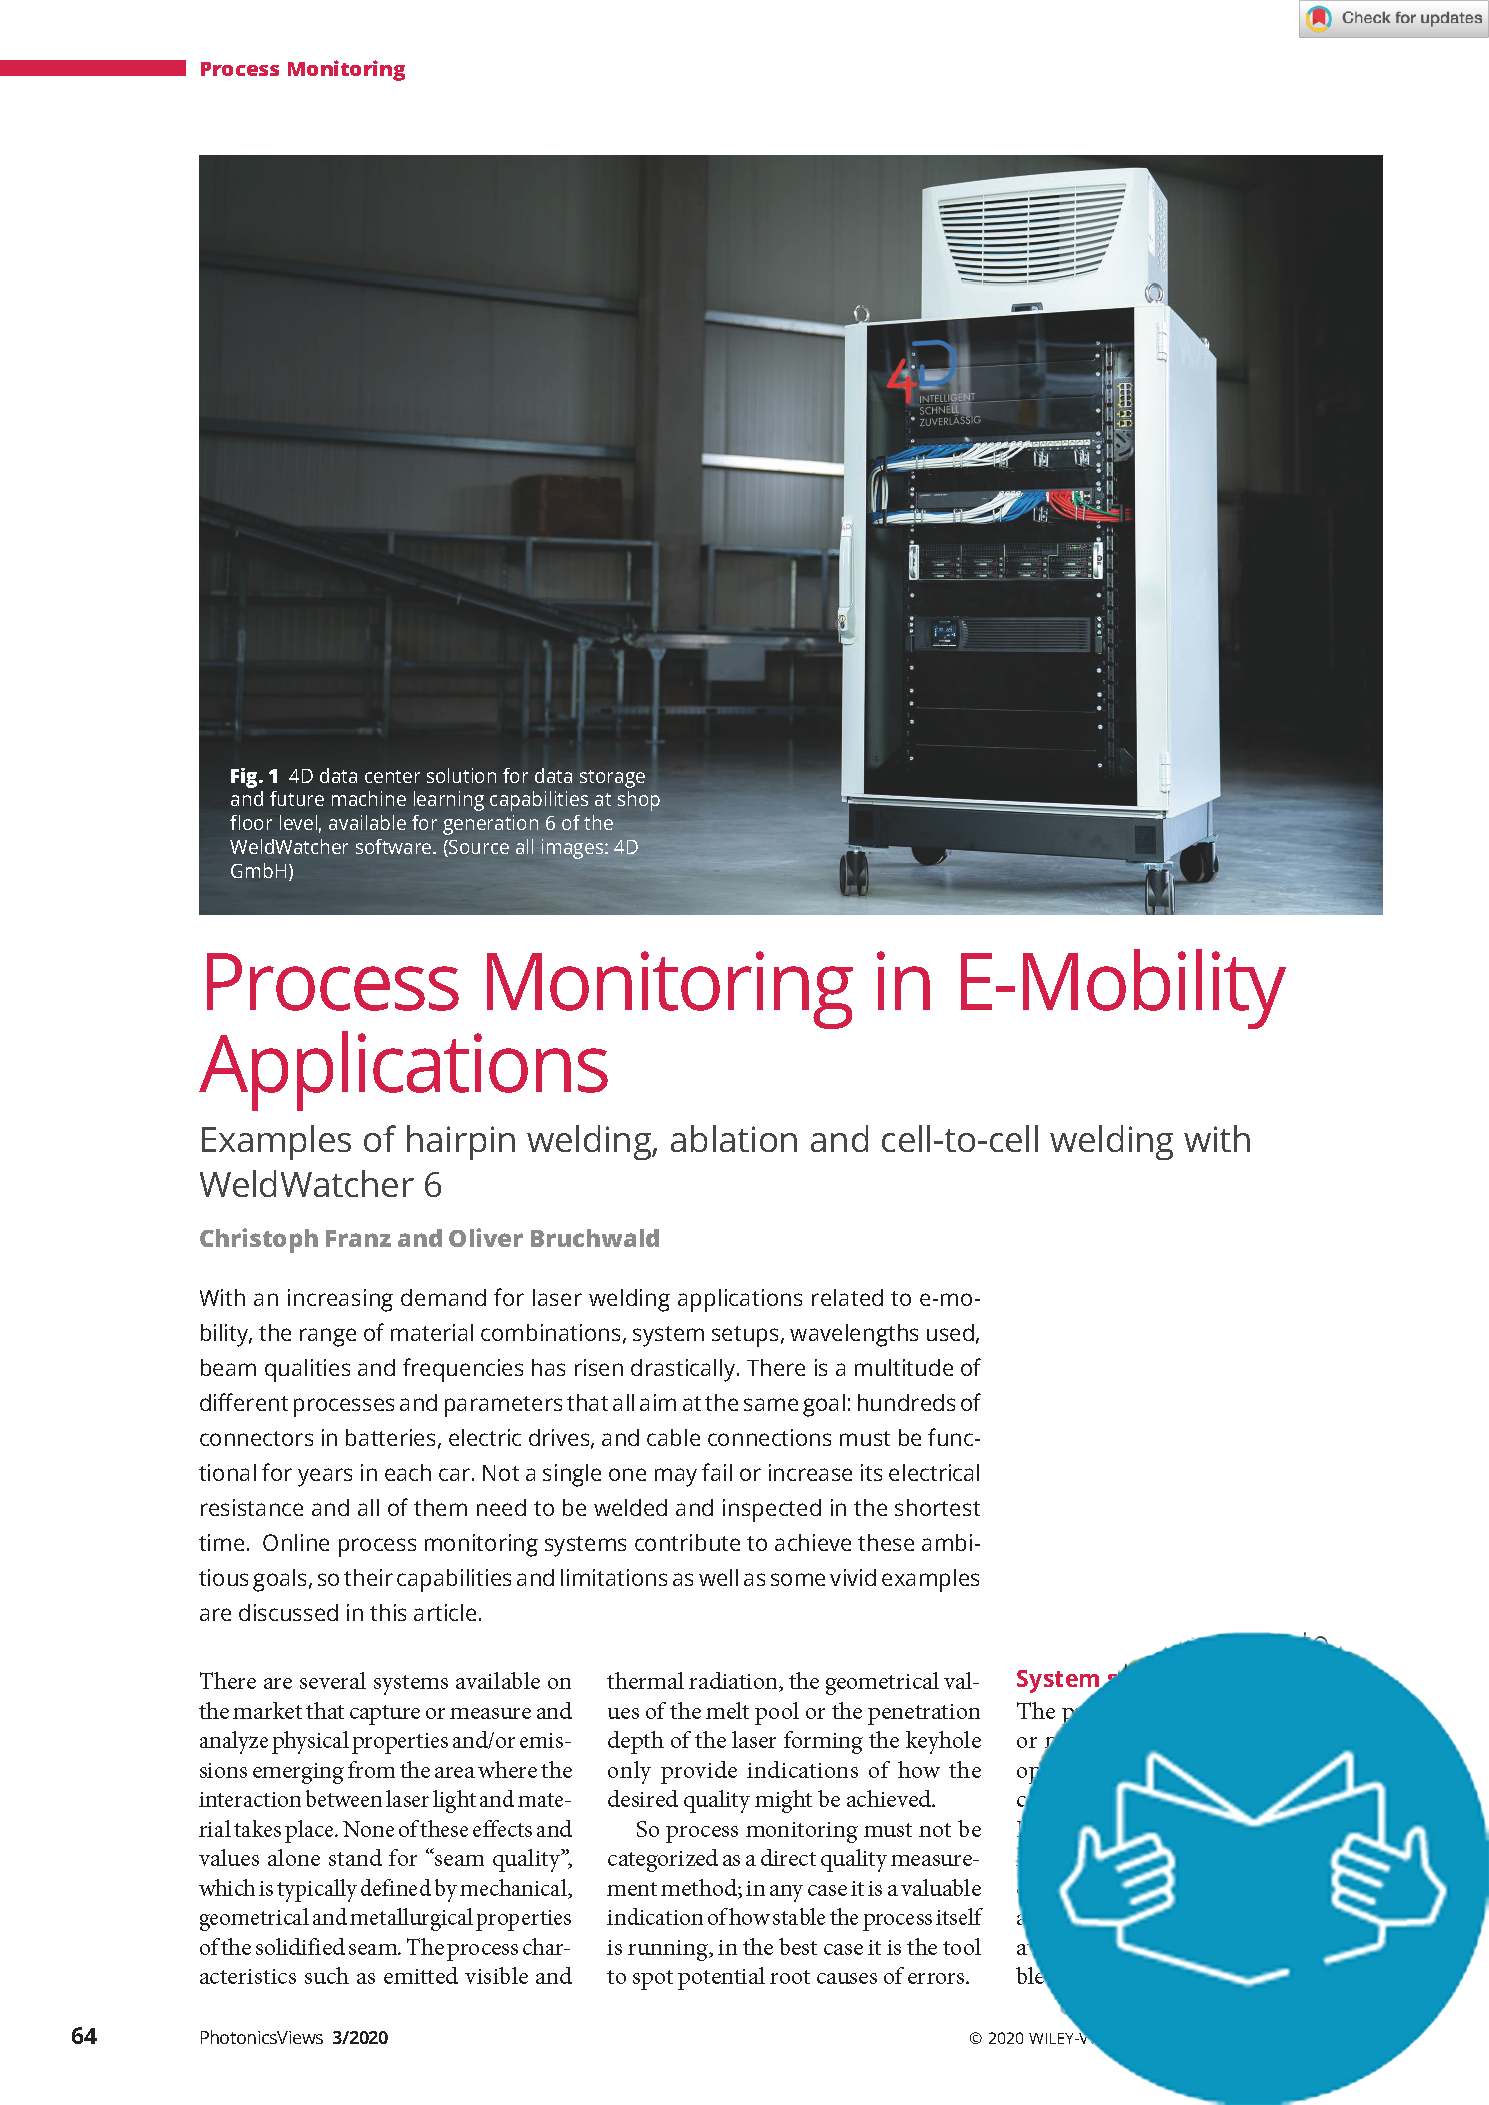 Process Monitoring in E-Mobility Applications